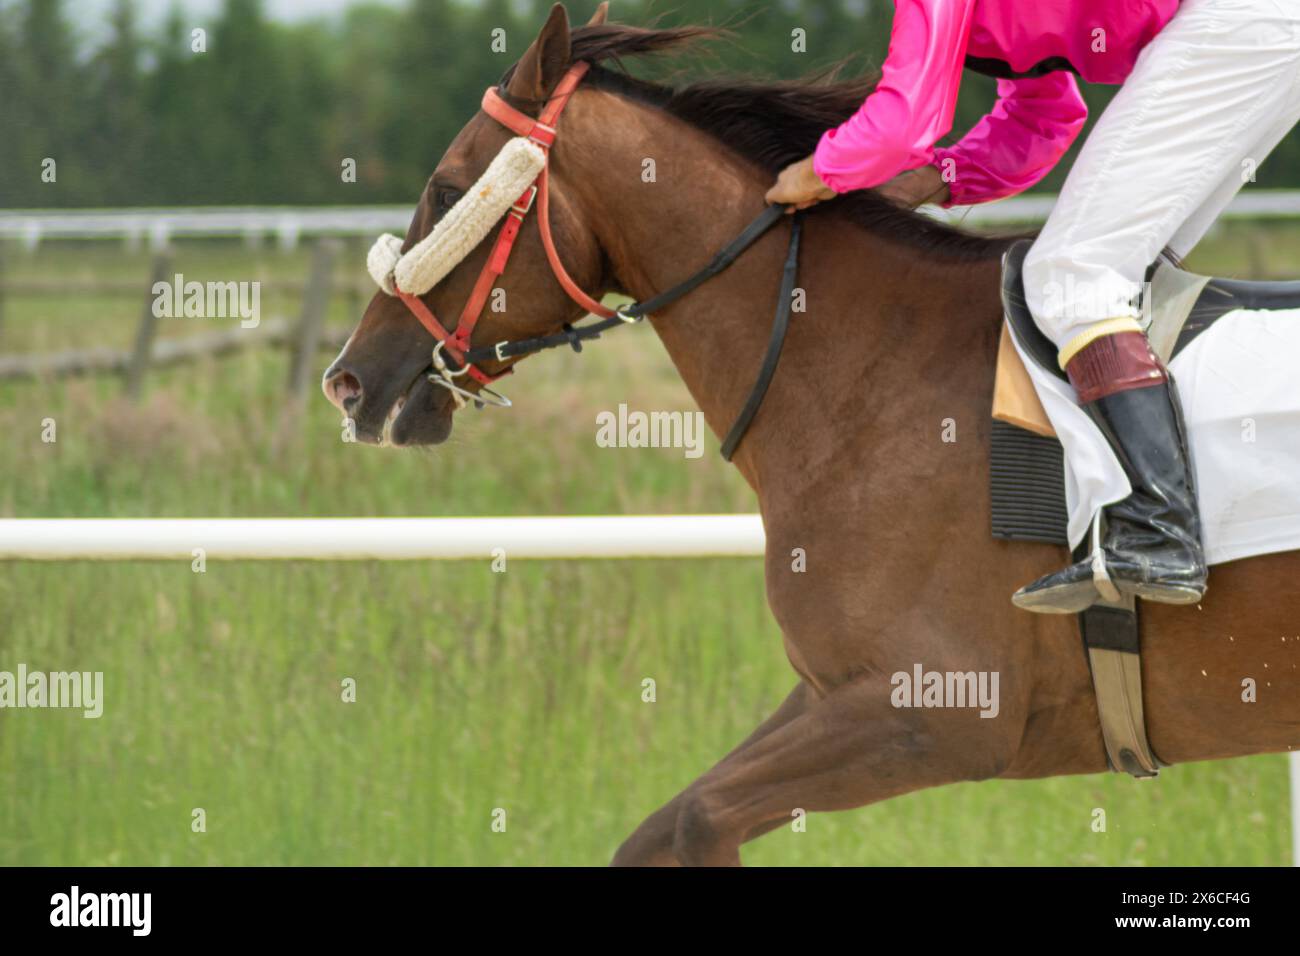 purebred horse racing in an equestrian competition, Spain Stock Photo